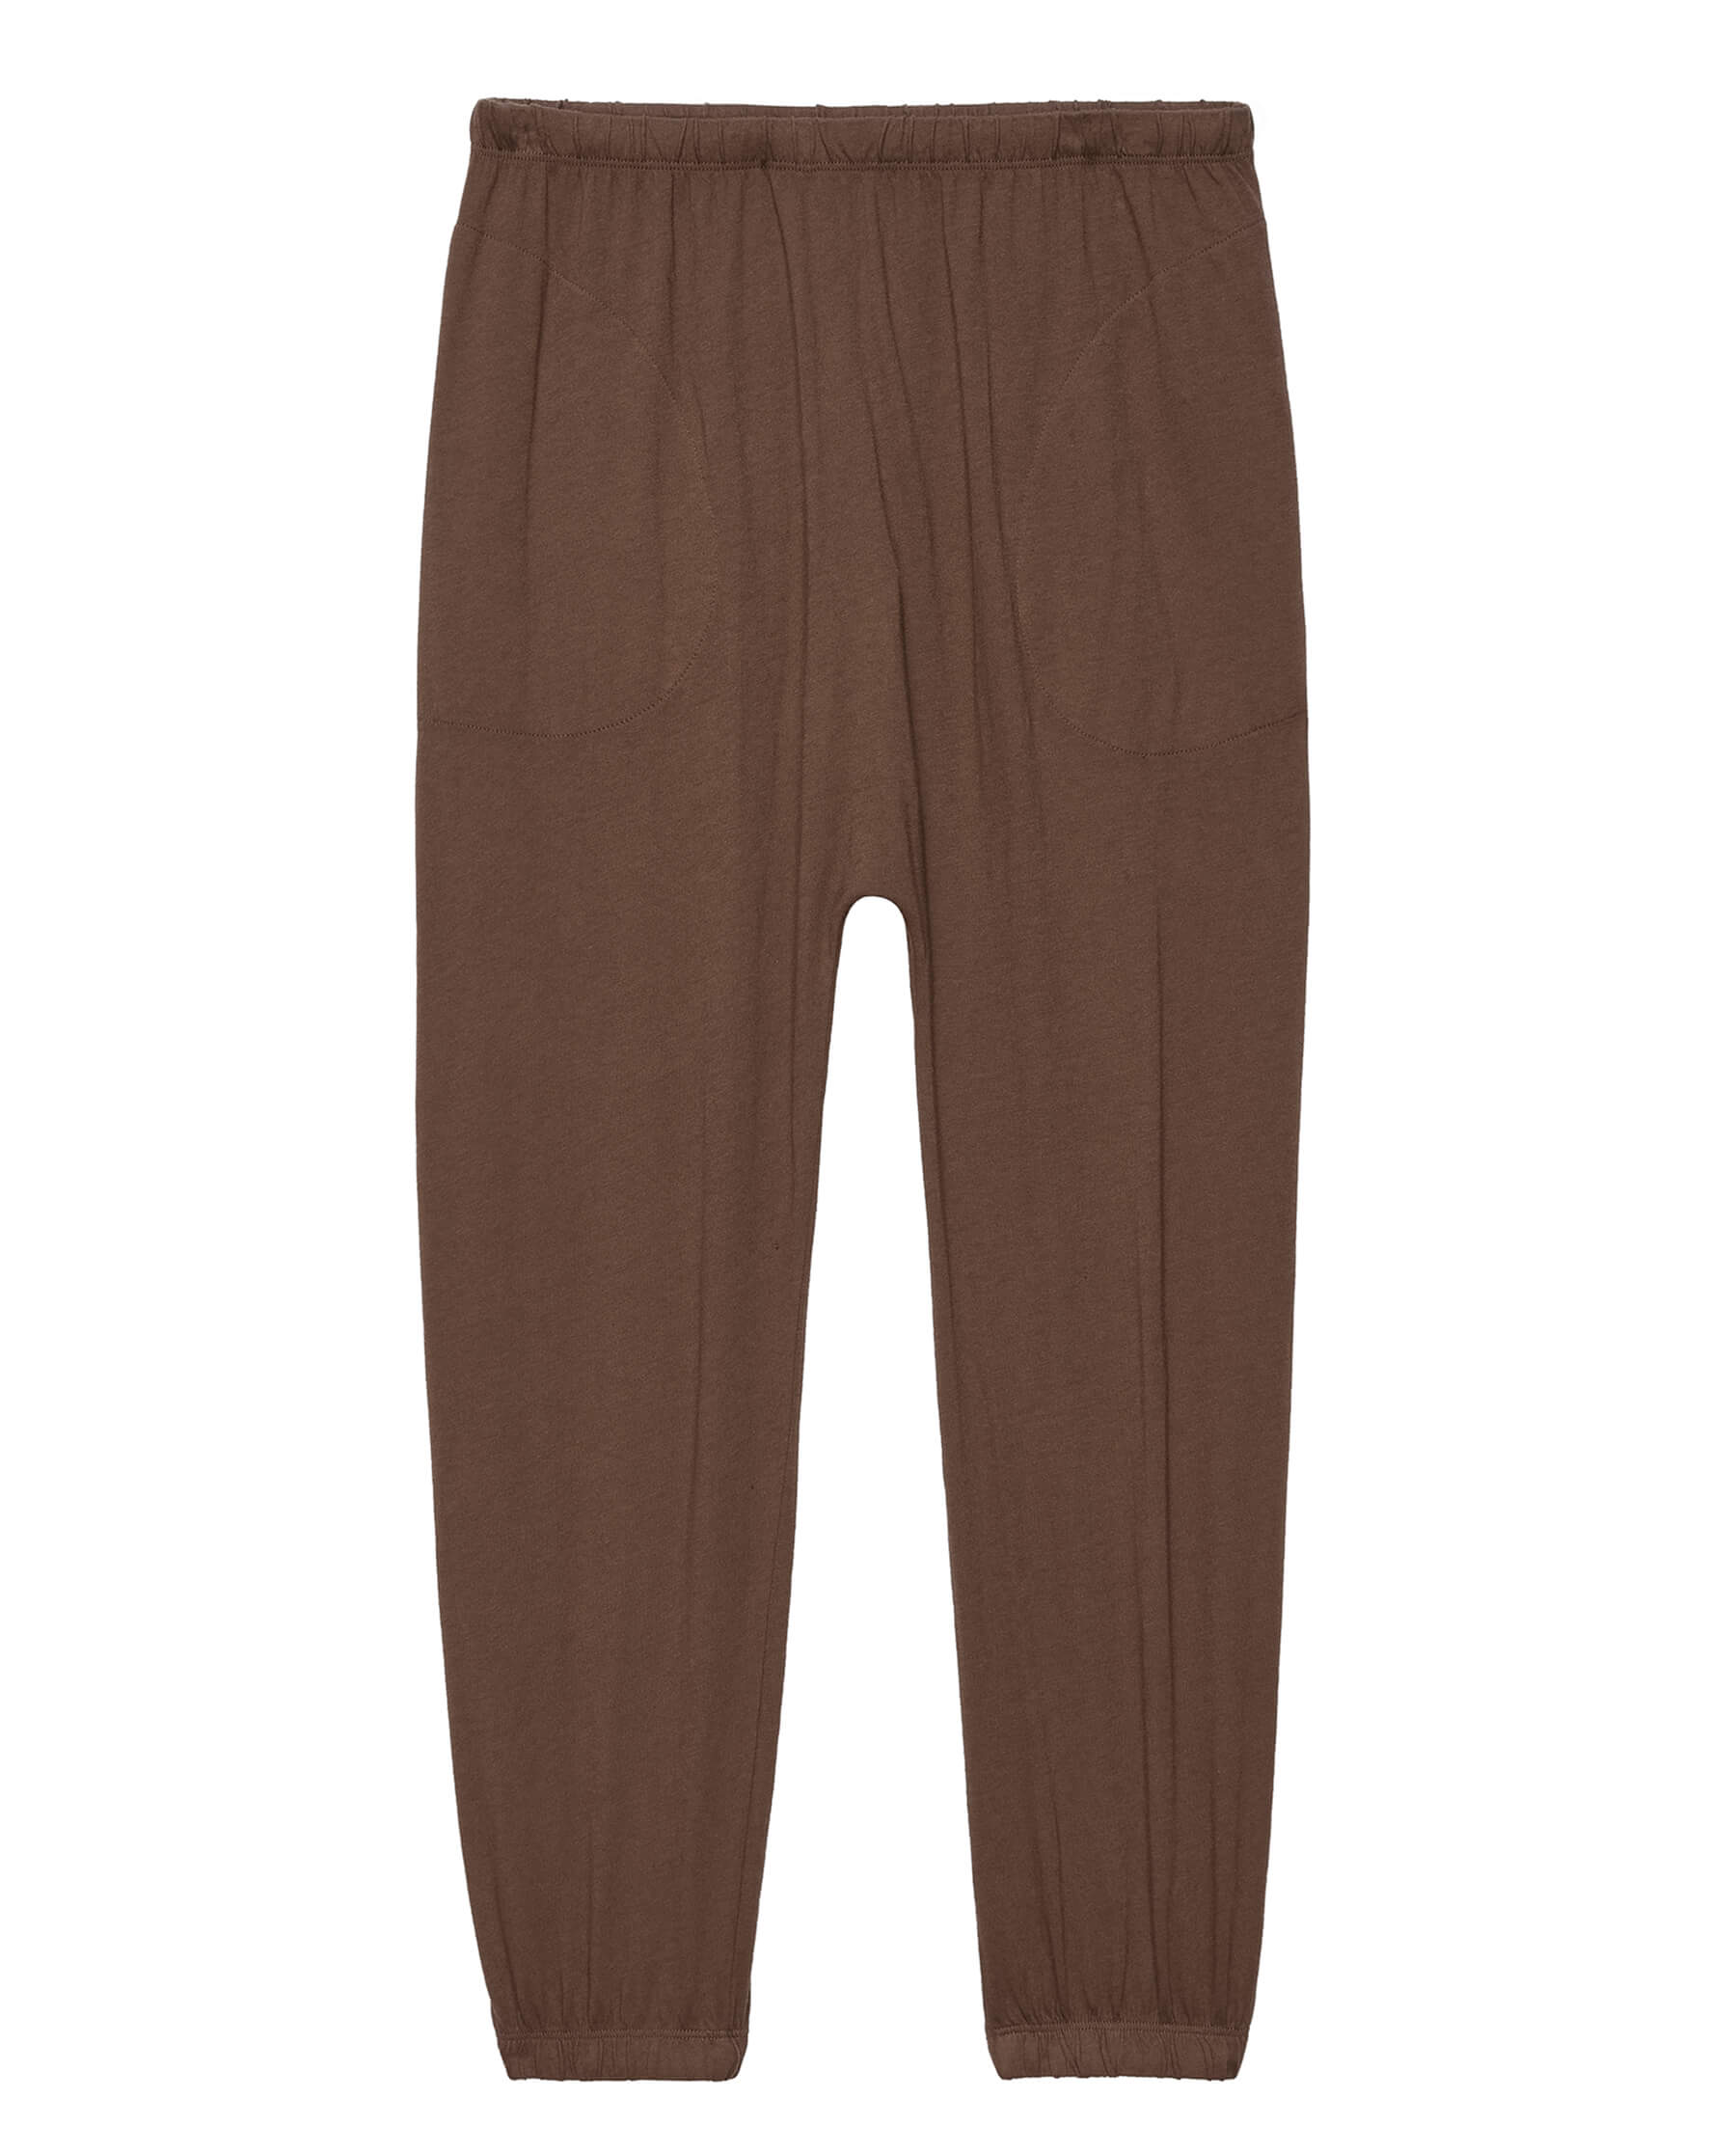 The Jersey Jogger Pant. -- Hickory